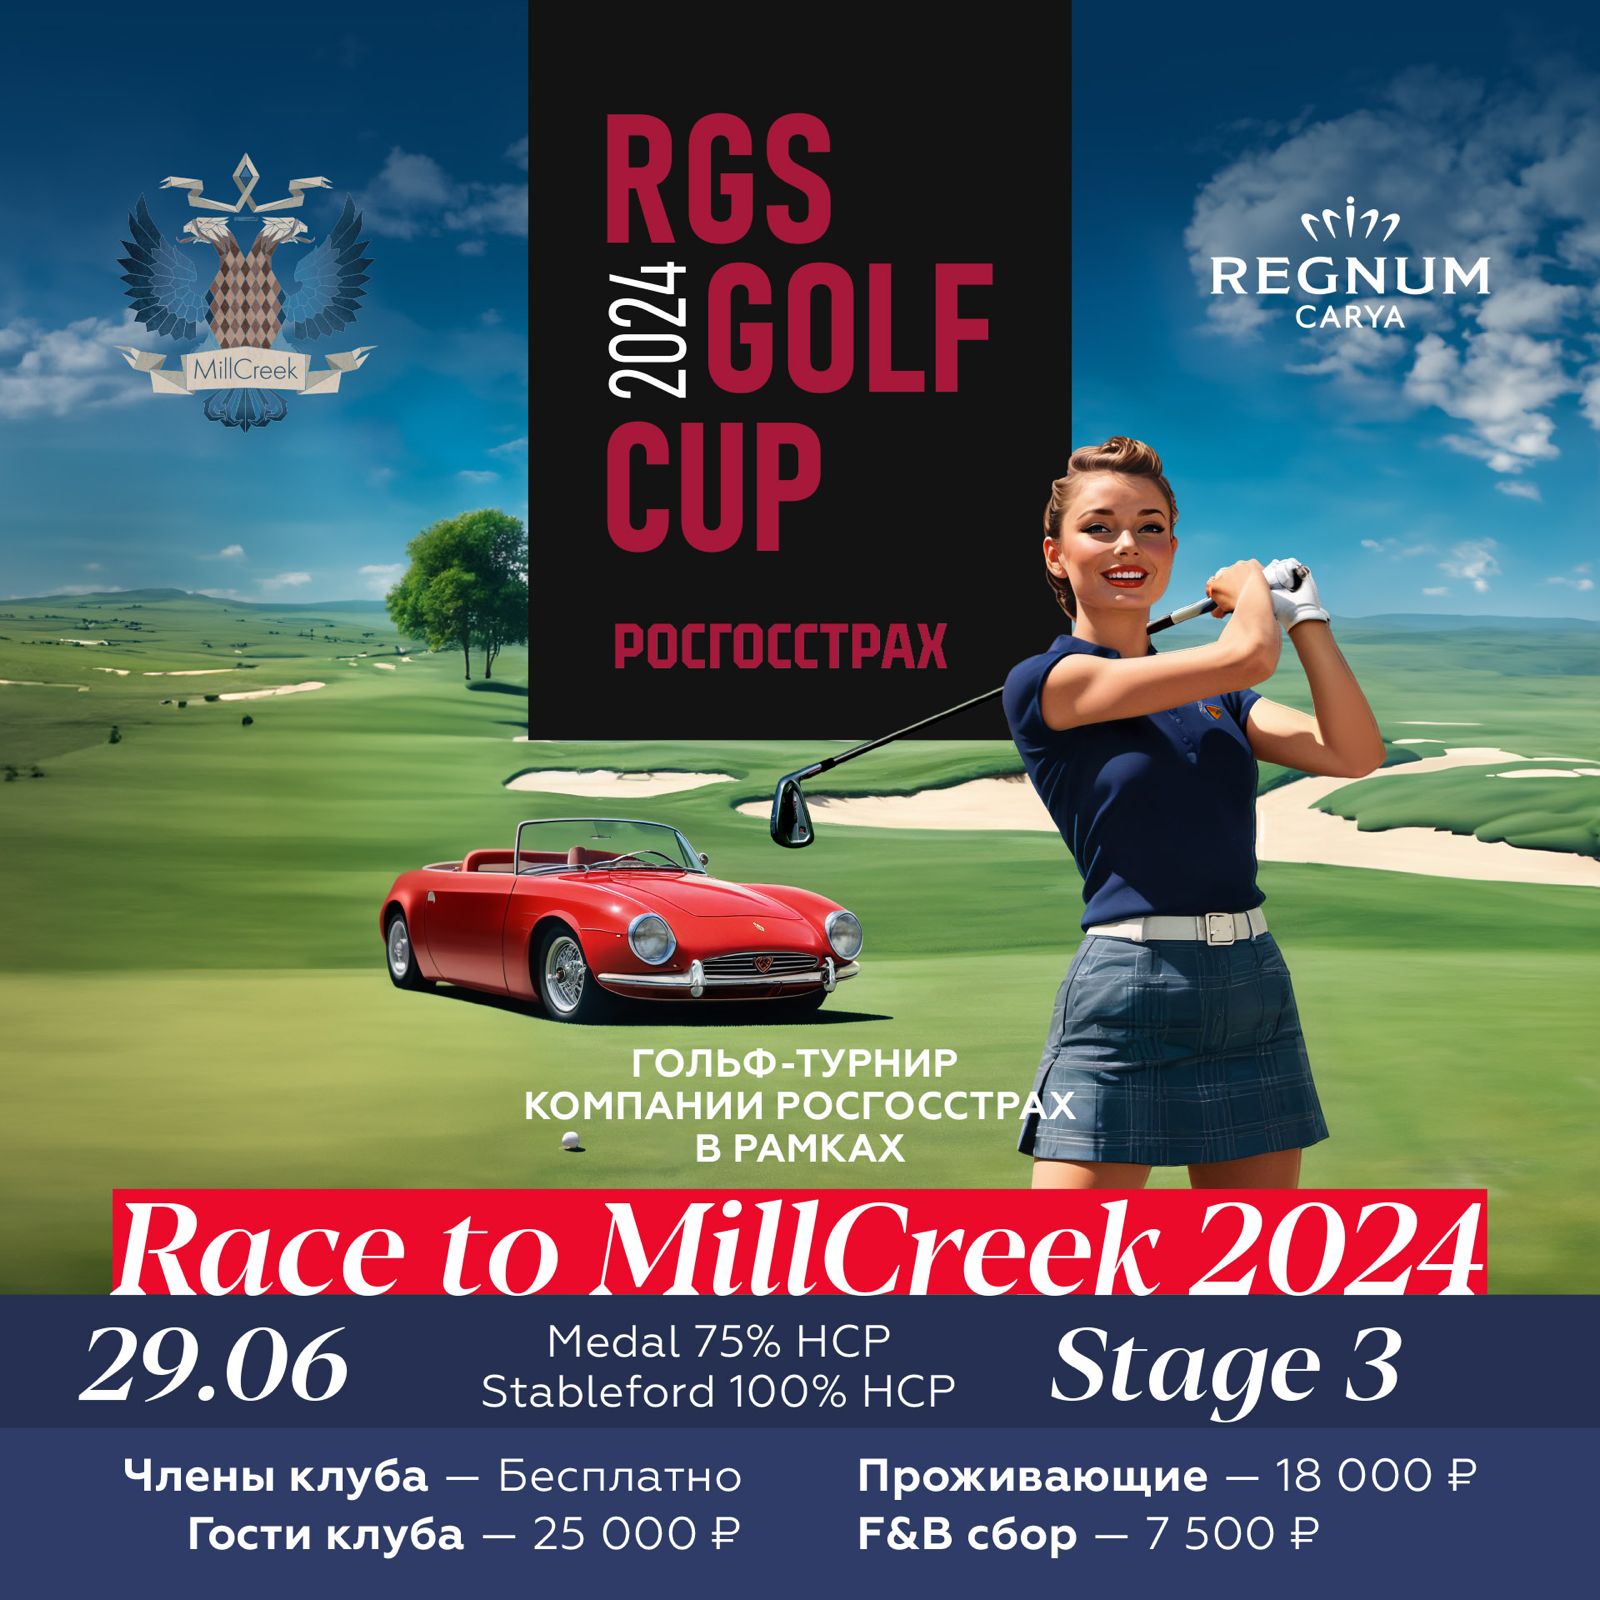 the third round of the Race to MillCreek tournament